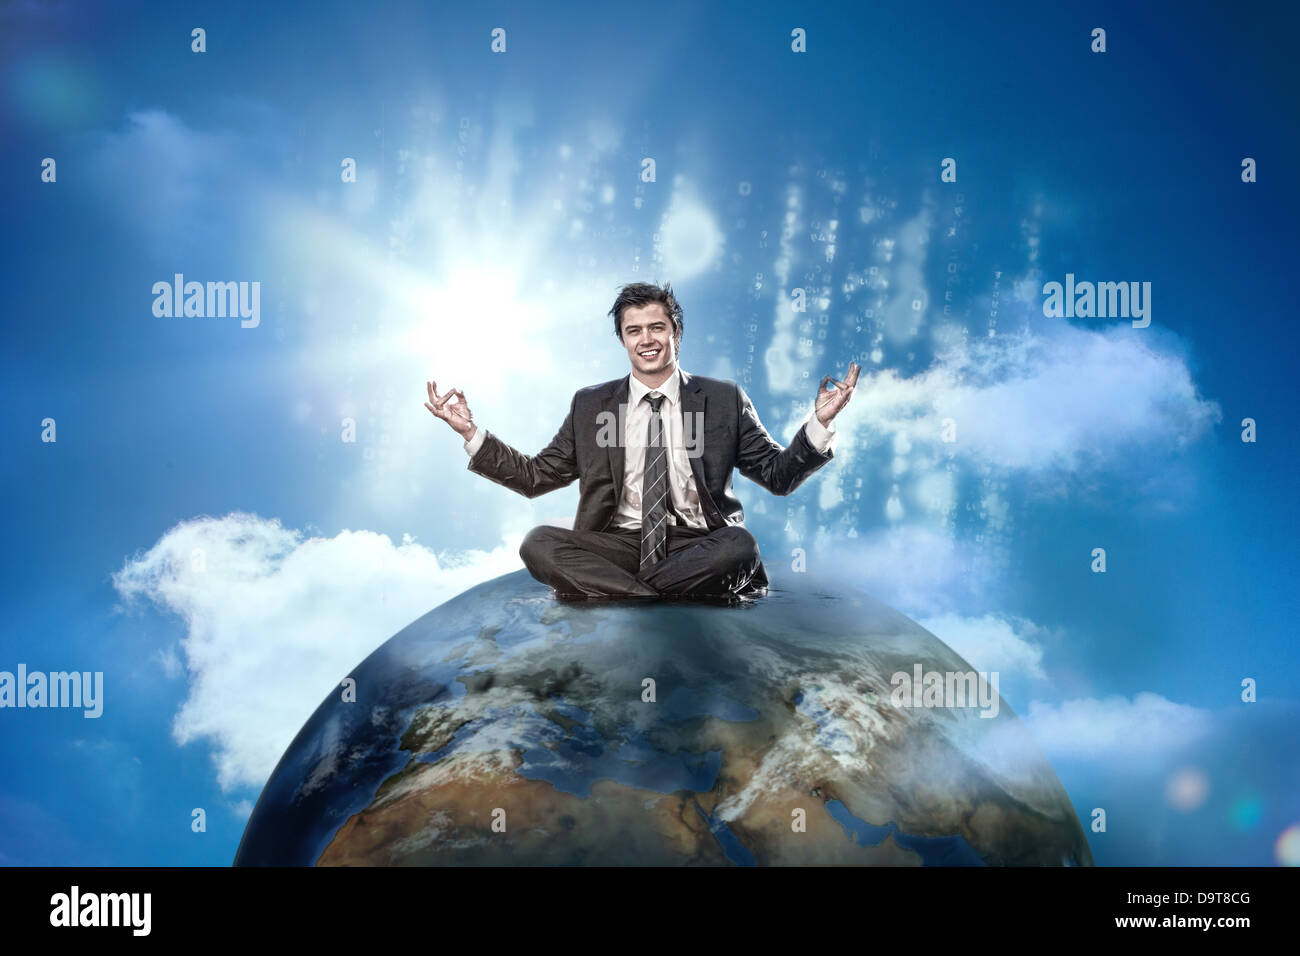 Sitting on top world stock photography images - Alamy